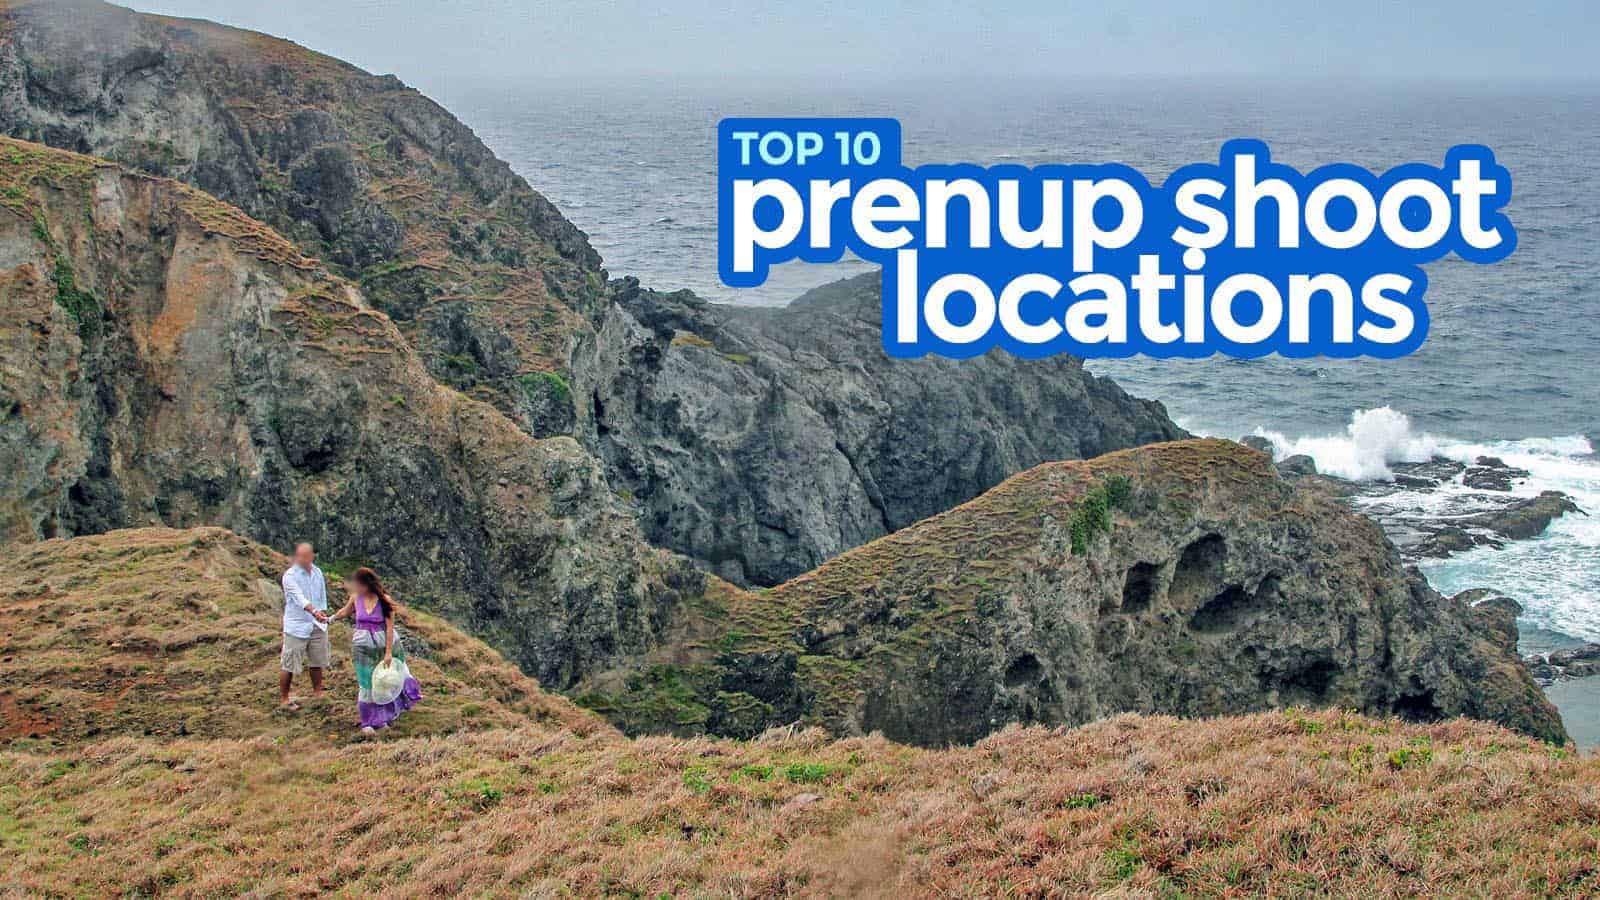 TOP 10 PRENUP SHOOT LOCATIONS IN THE PHILIPPINES